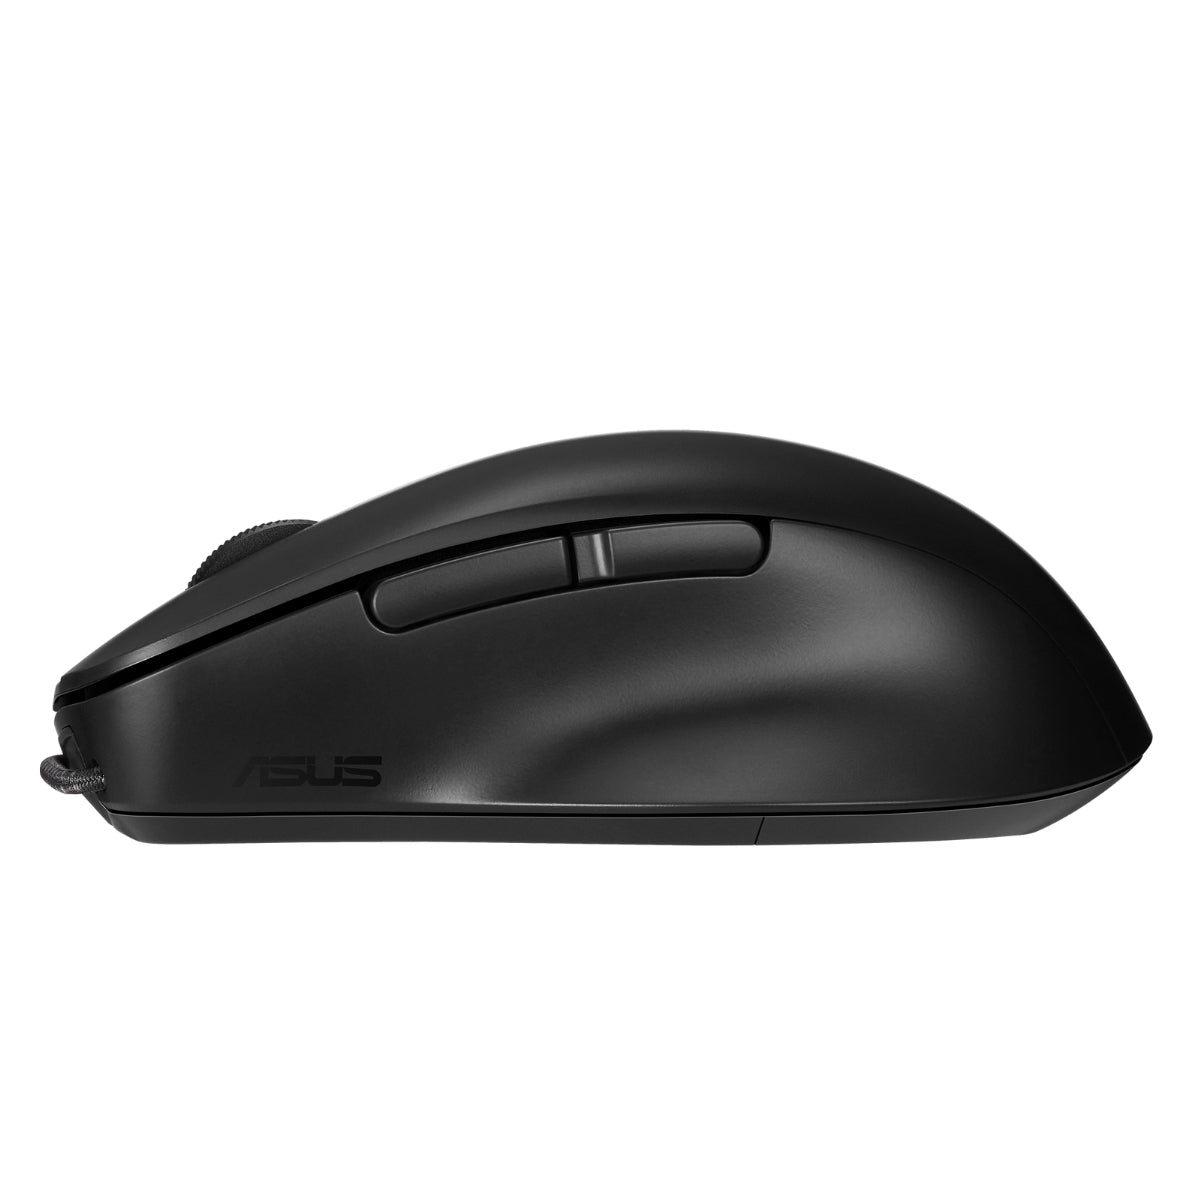 asus-smarto-mouse-md200